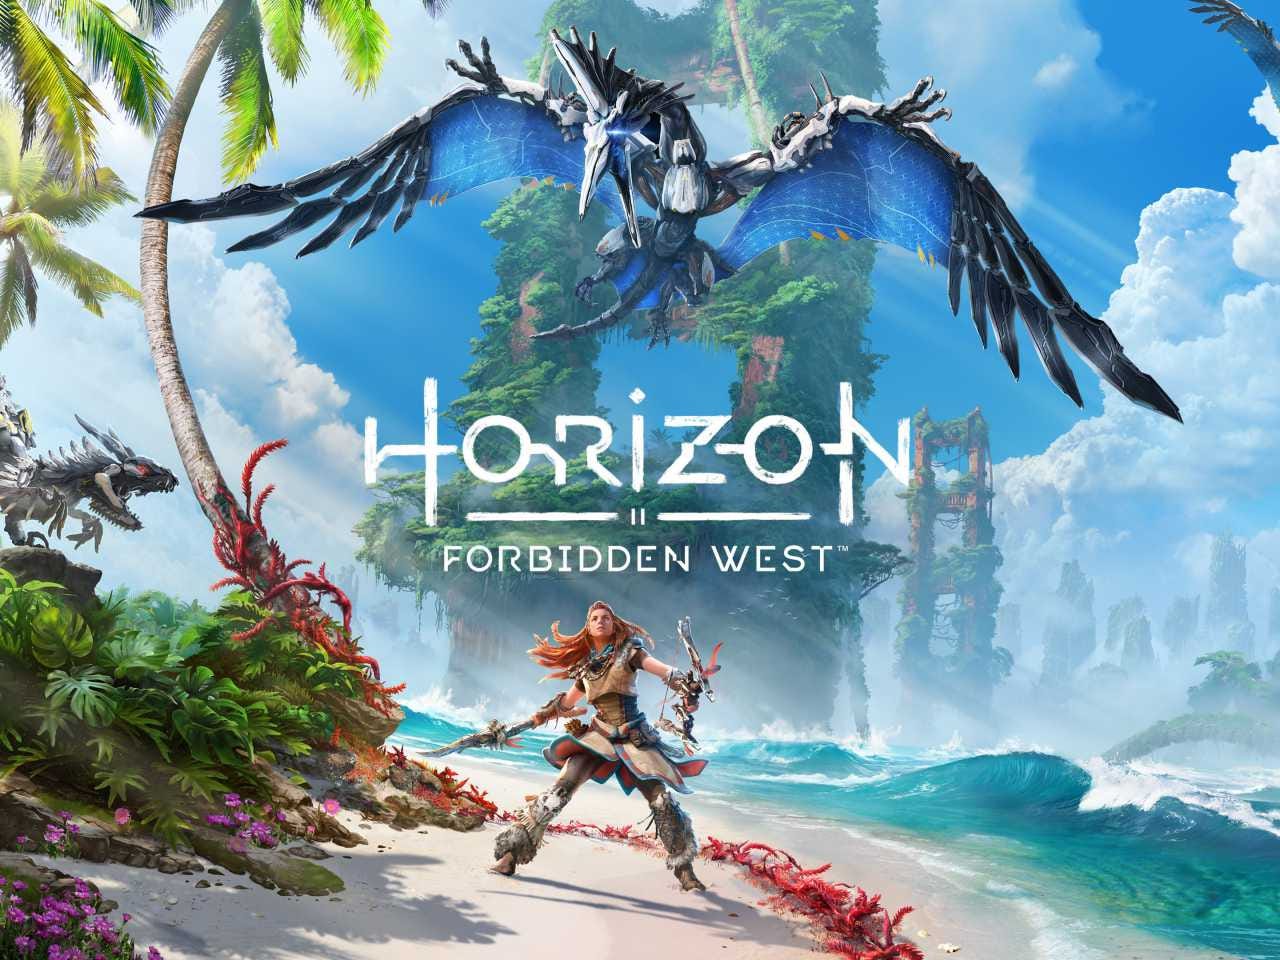 Horizon Forbidden West is a visual delight, but a step back in gameplay